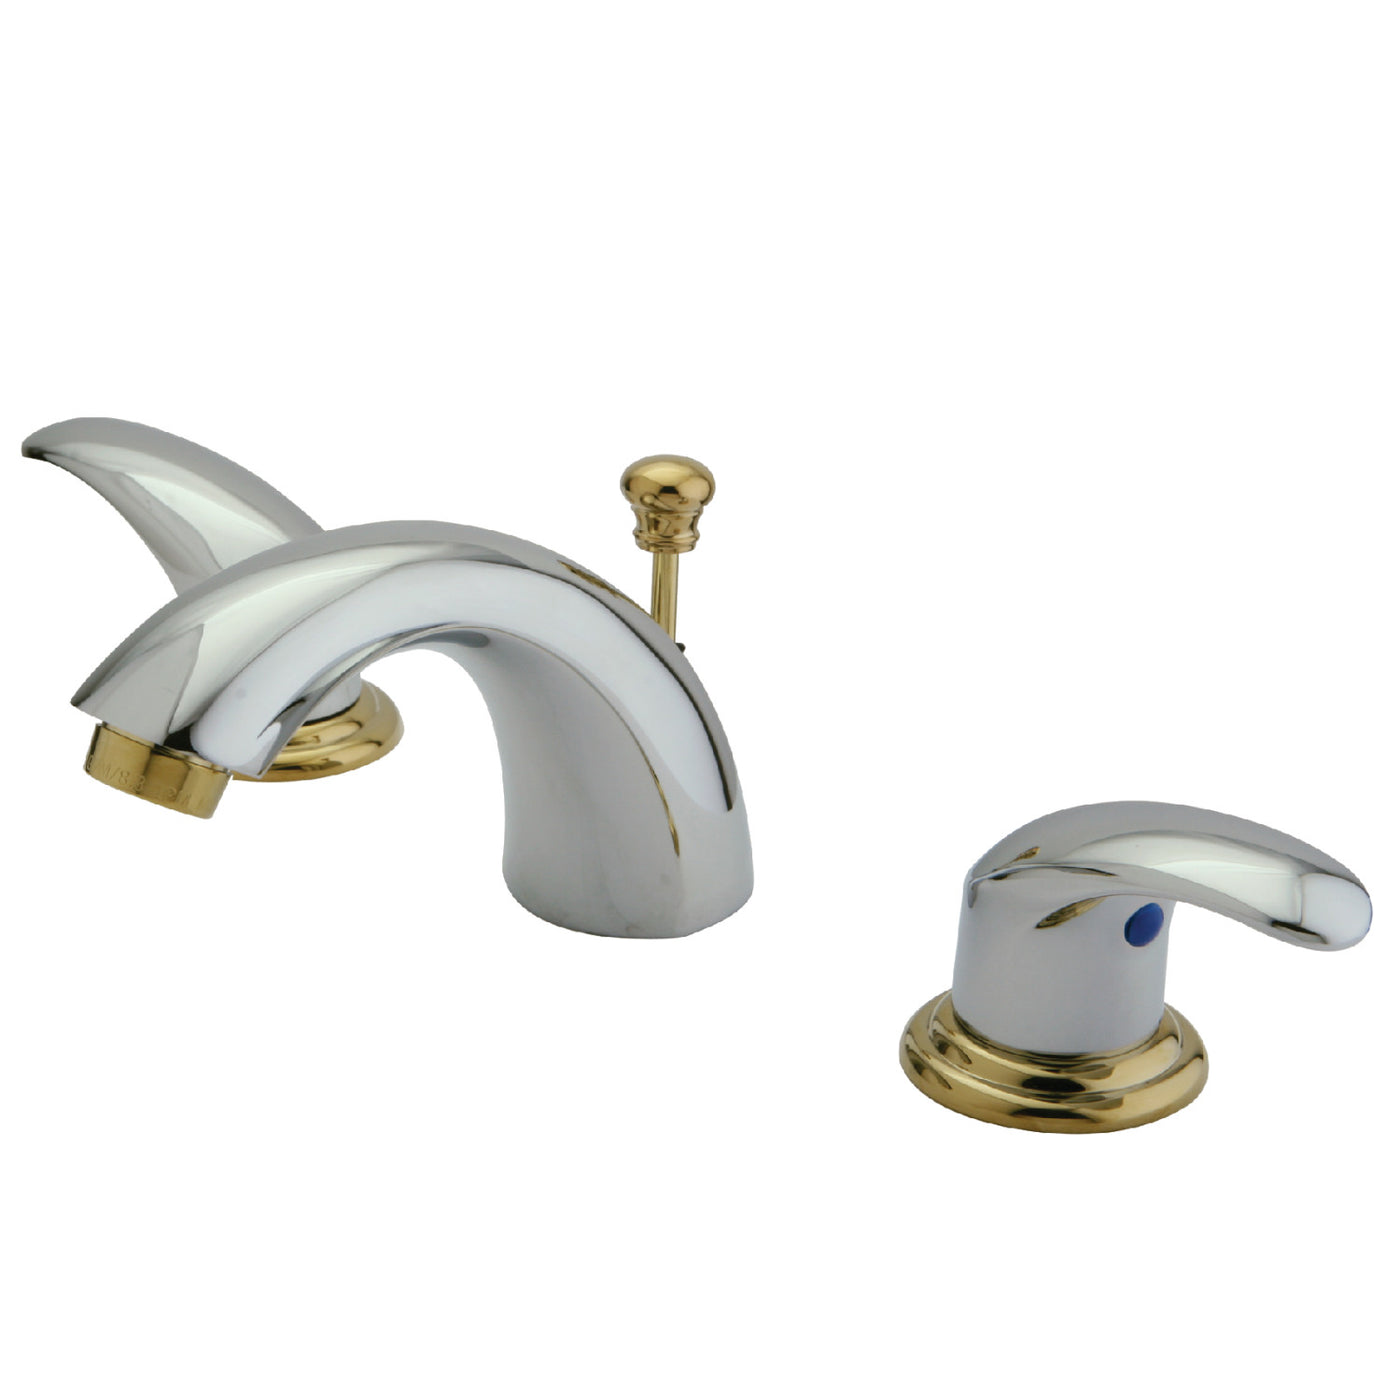 Elements of Design EB6954LL Mini-Widespread Bathroom Faucet, Polished Chrome/Polished Brass